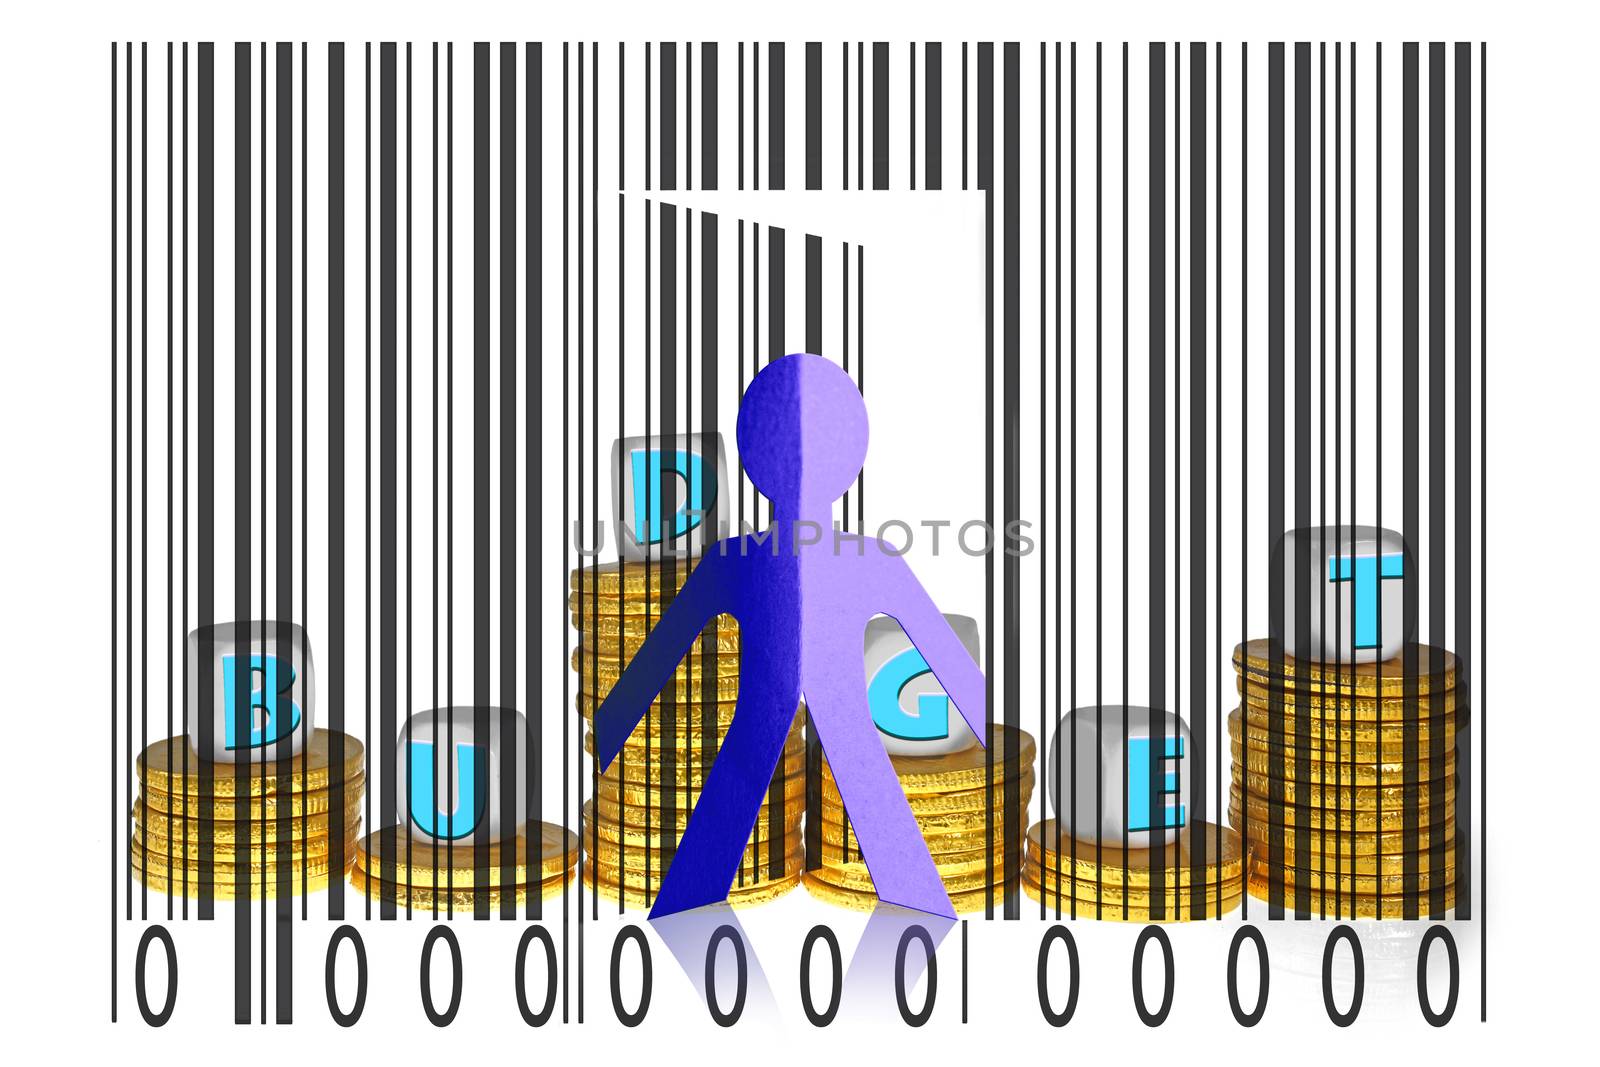 Paperman coming out of a bar code with Budget word by yands